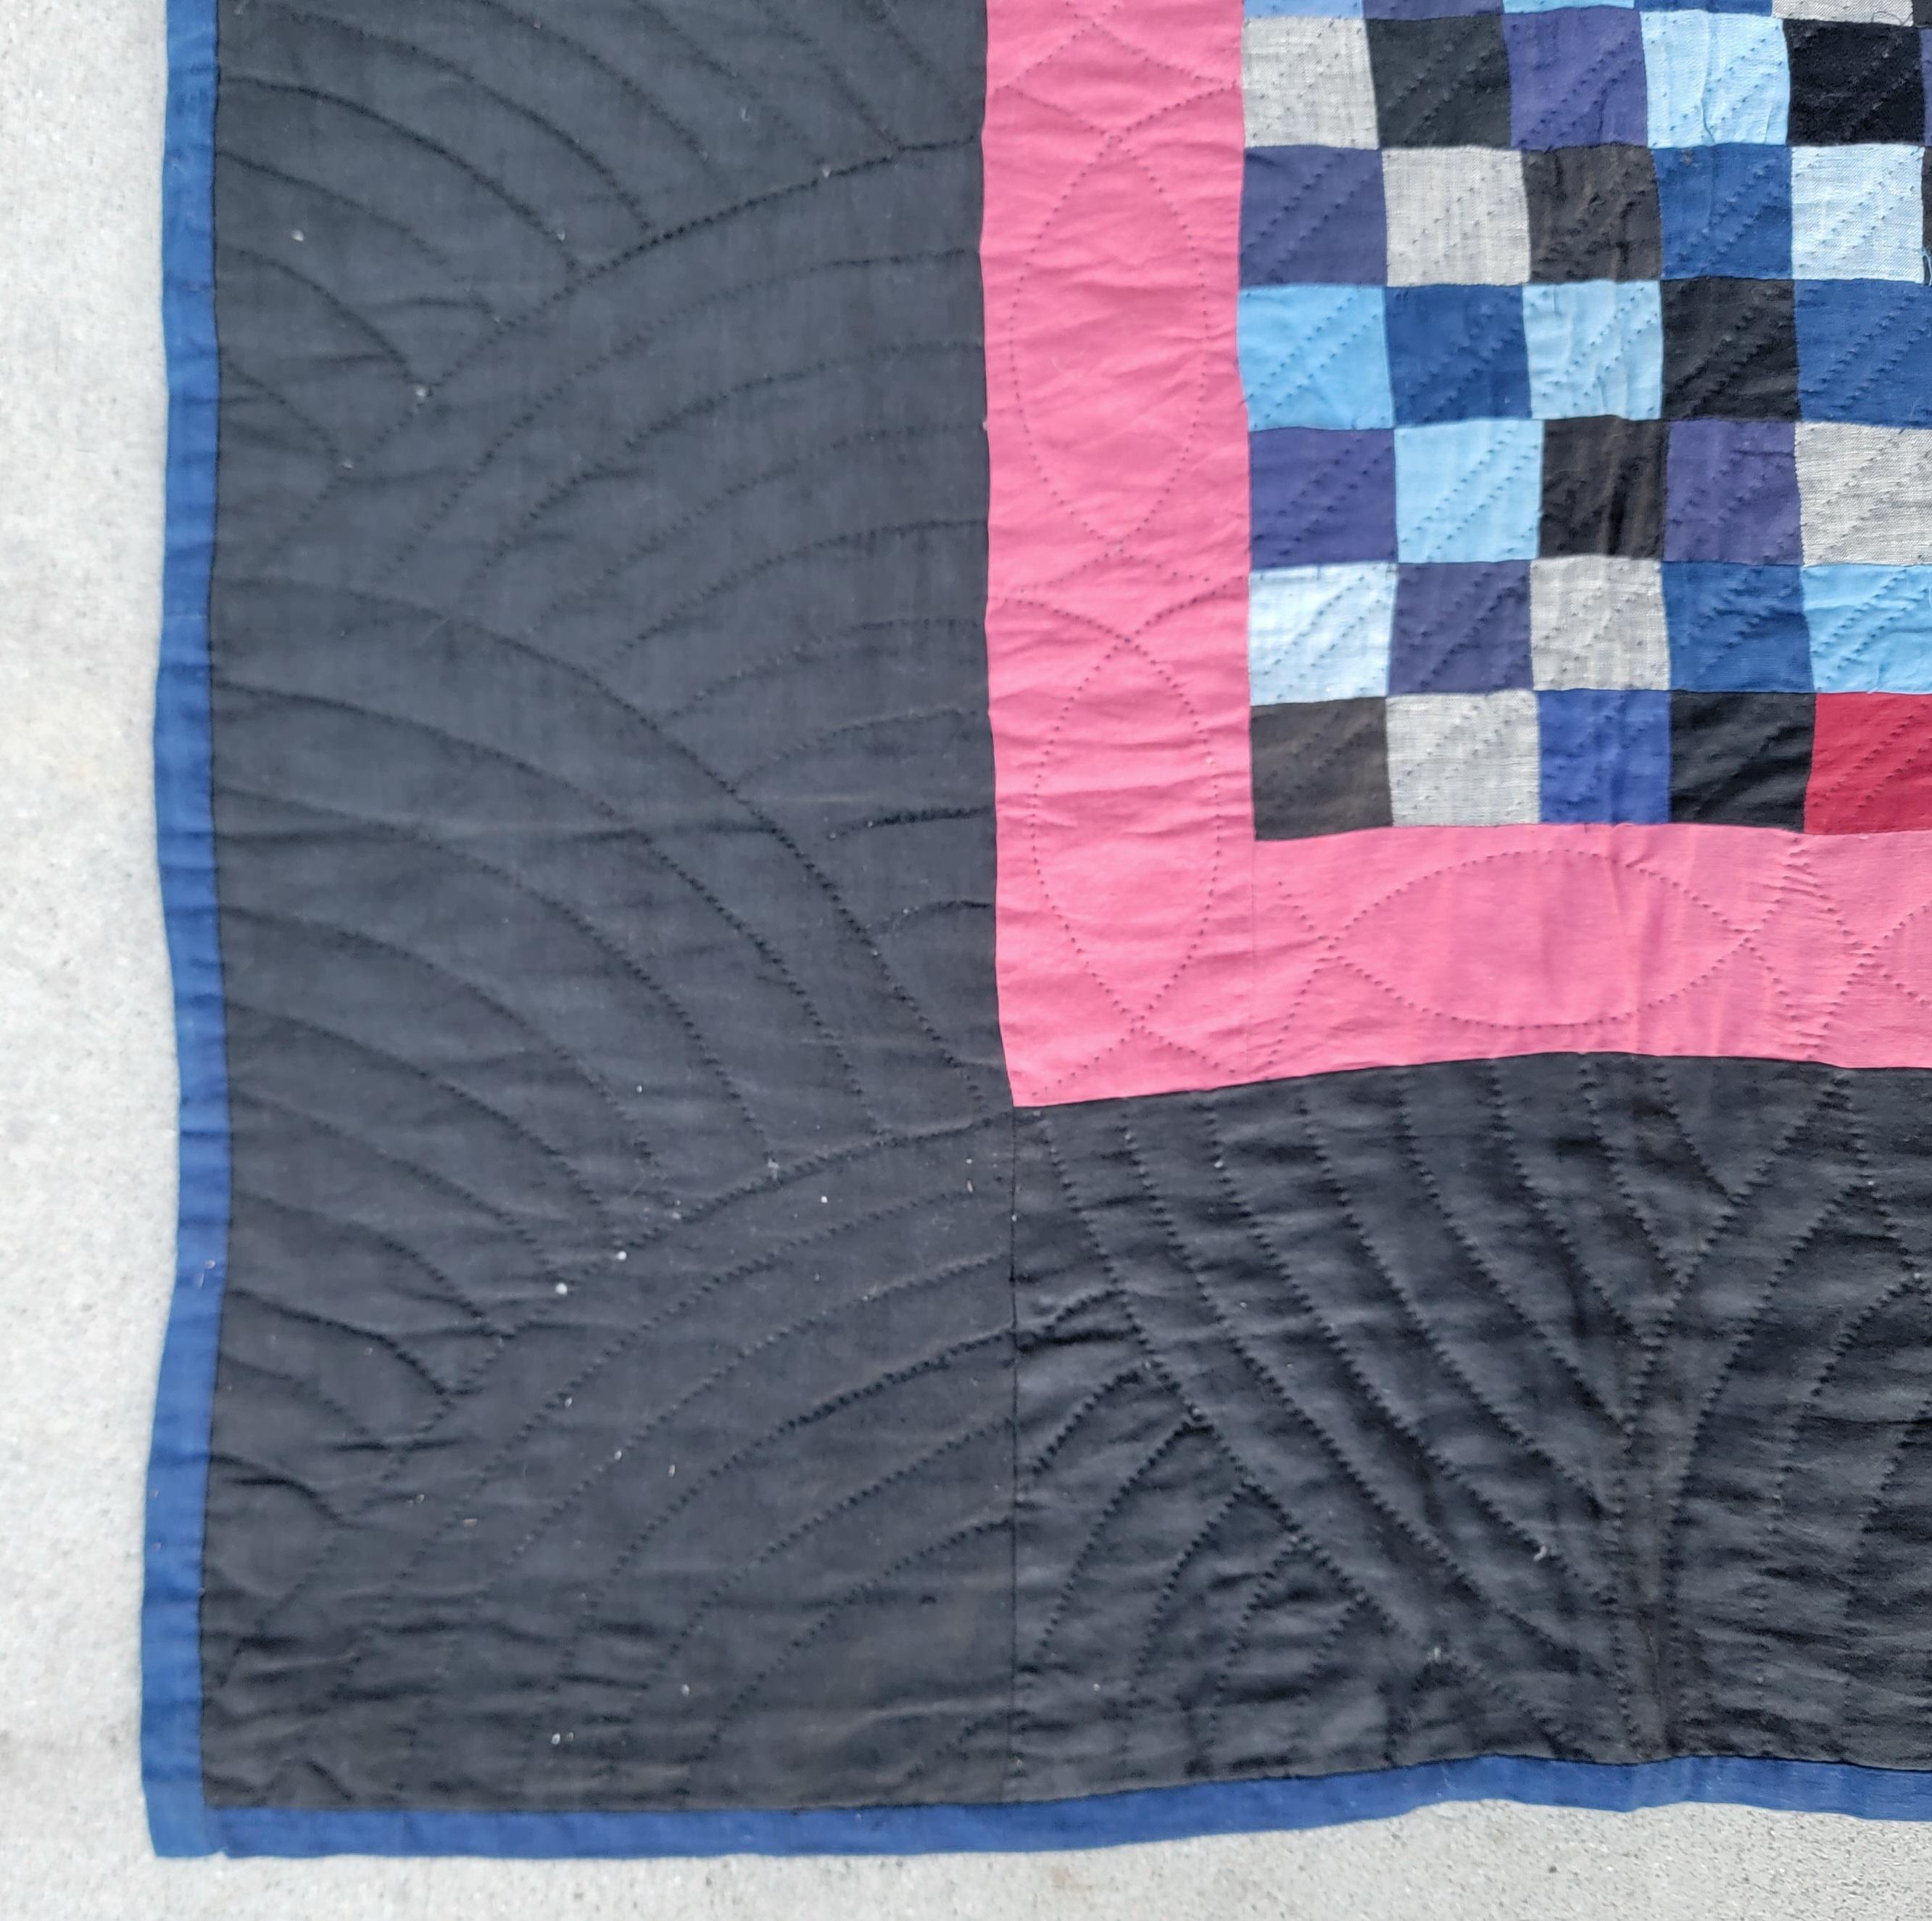 Hand-Crafted Amish One Patch Crib Quilt from Ohio